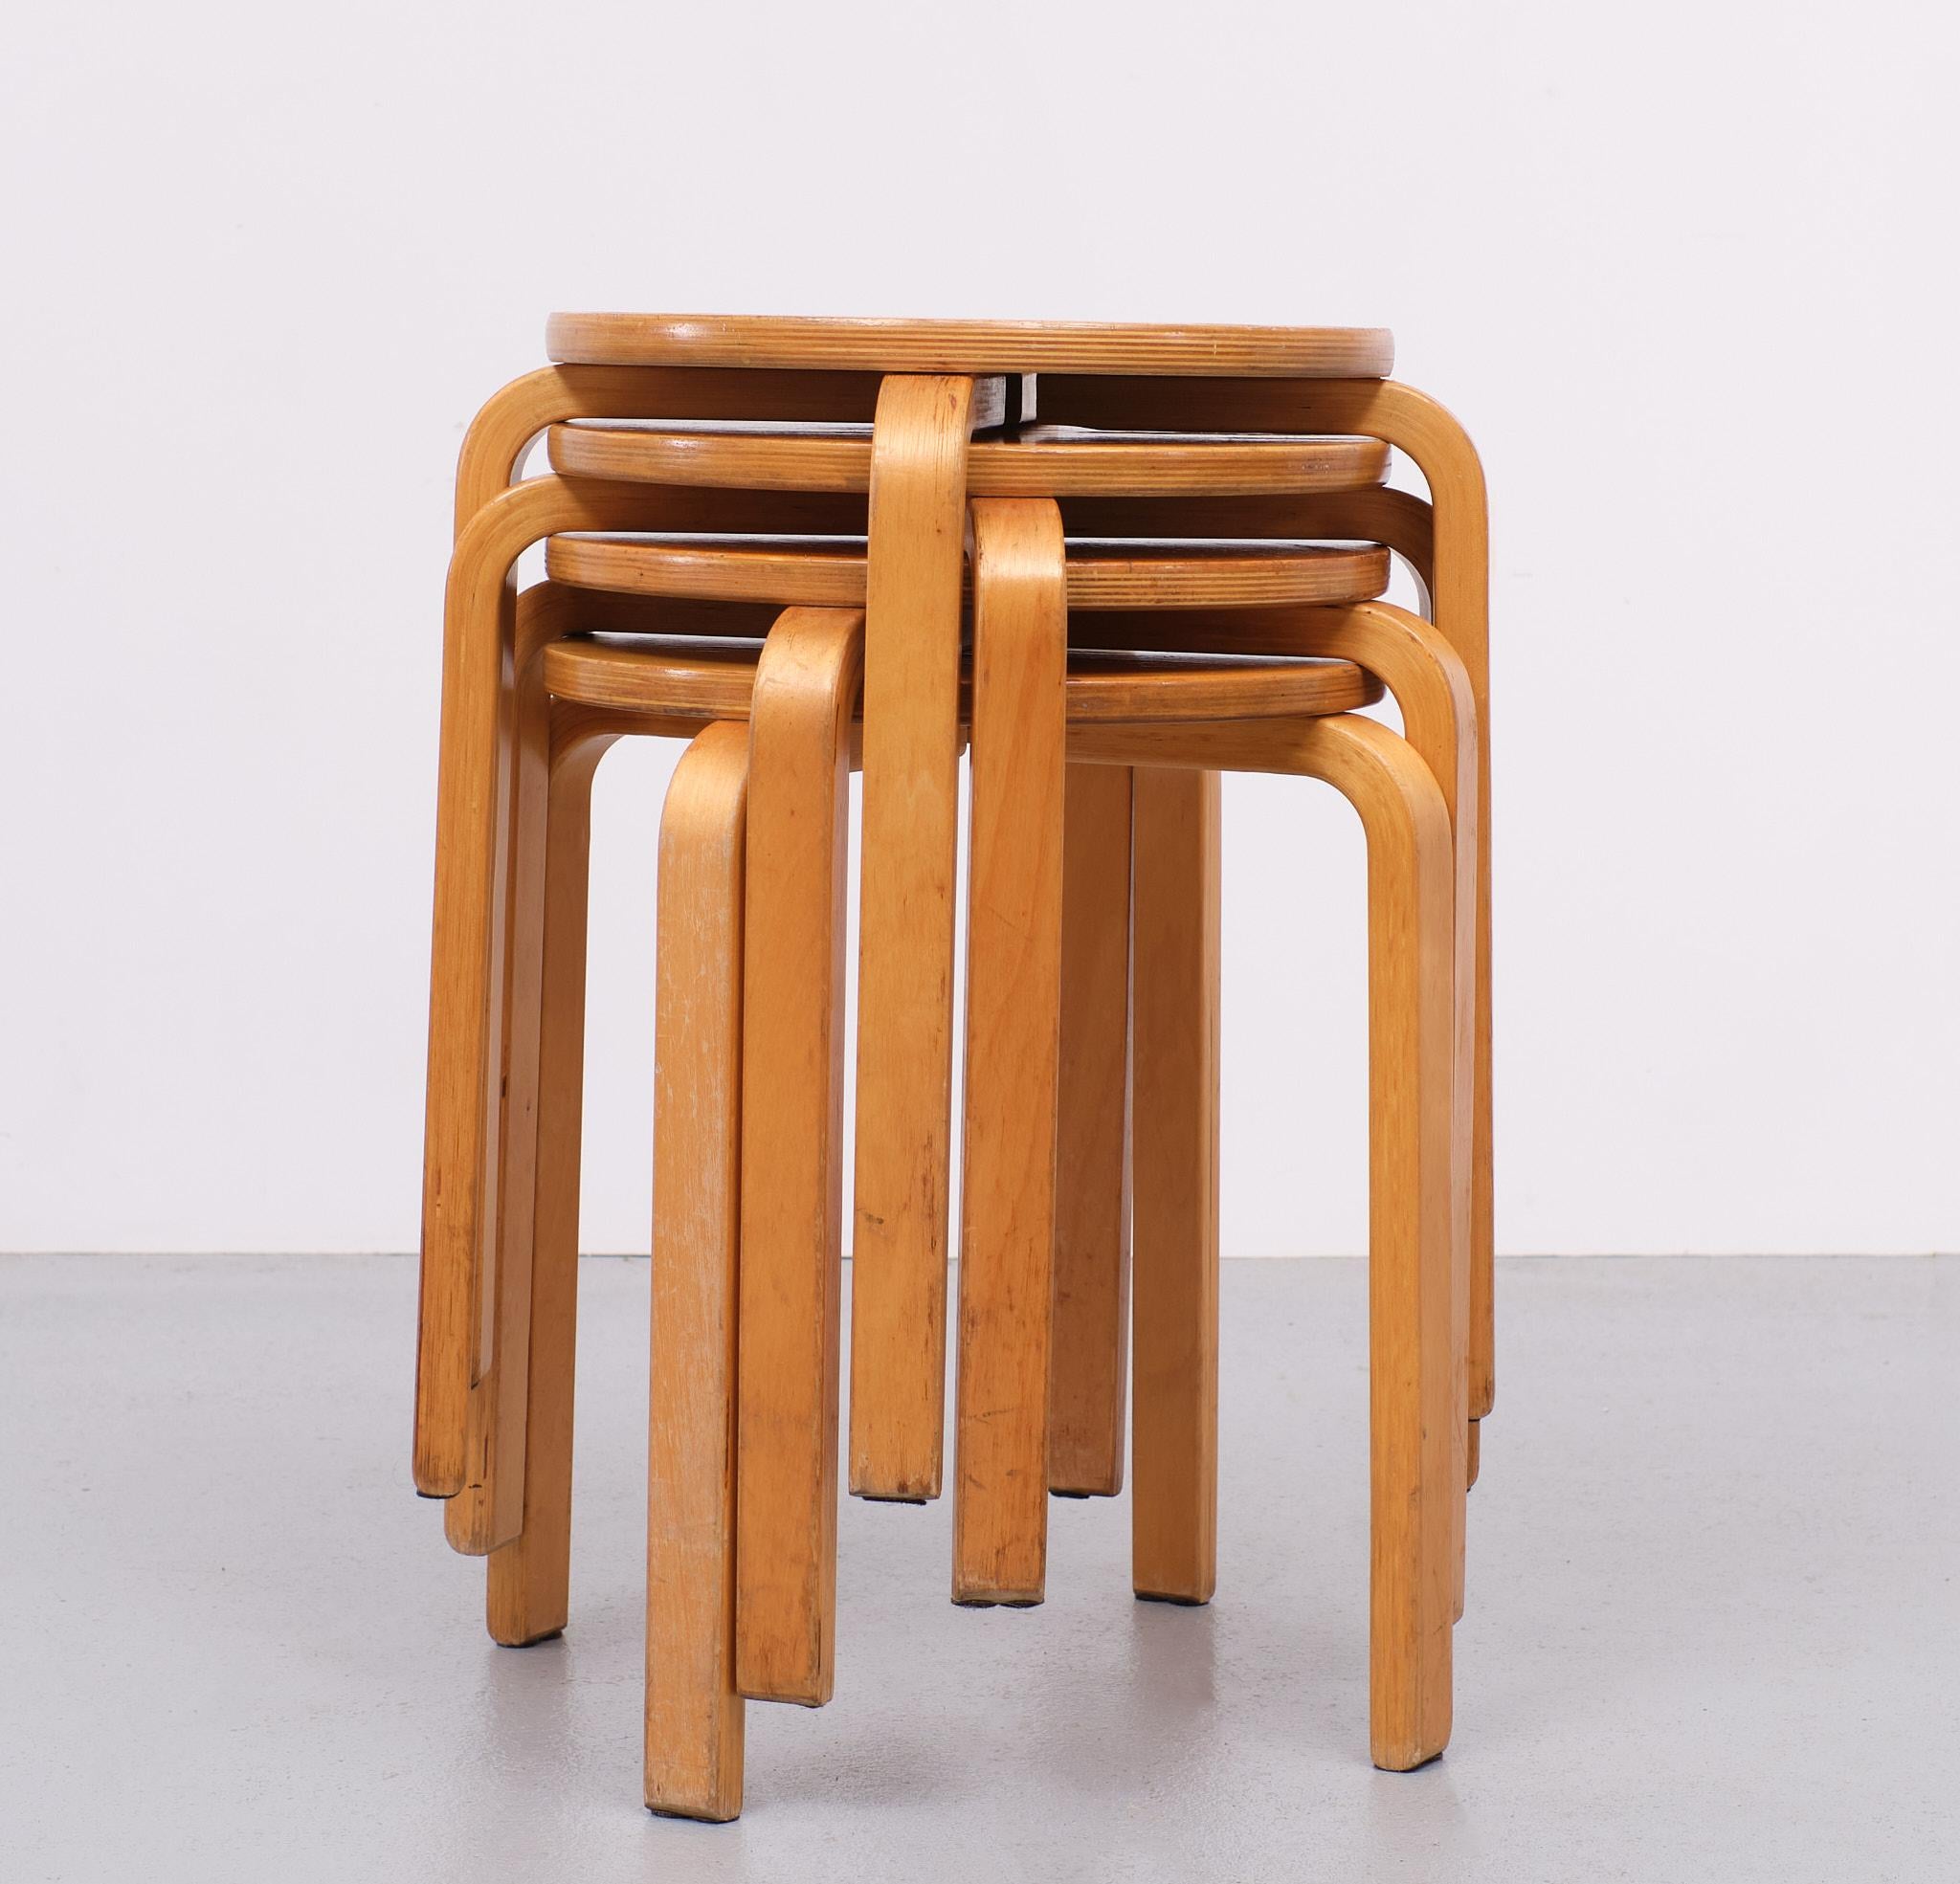 Very nice set of Frosta Bend wood stools. 4 Pieces original designed by Alvar Aalto manufactured by Ikea. Must love this perfect honing color. Stack able. 
So stylish when unused stacked in the corner of the room 
or kitchen.